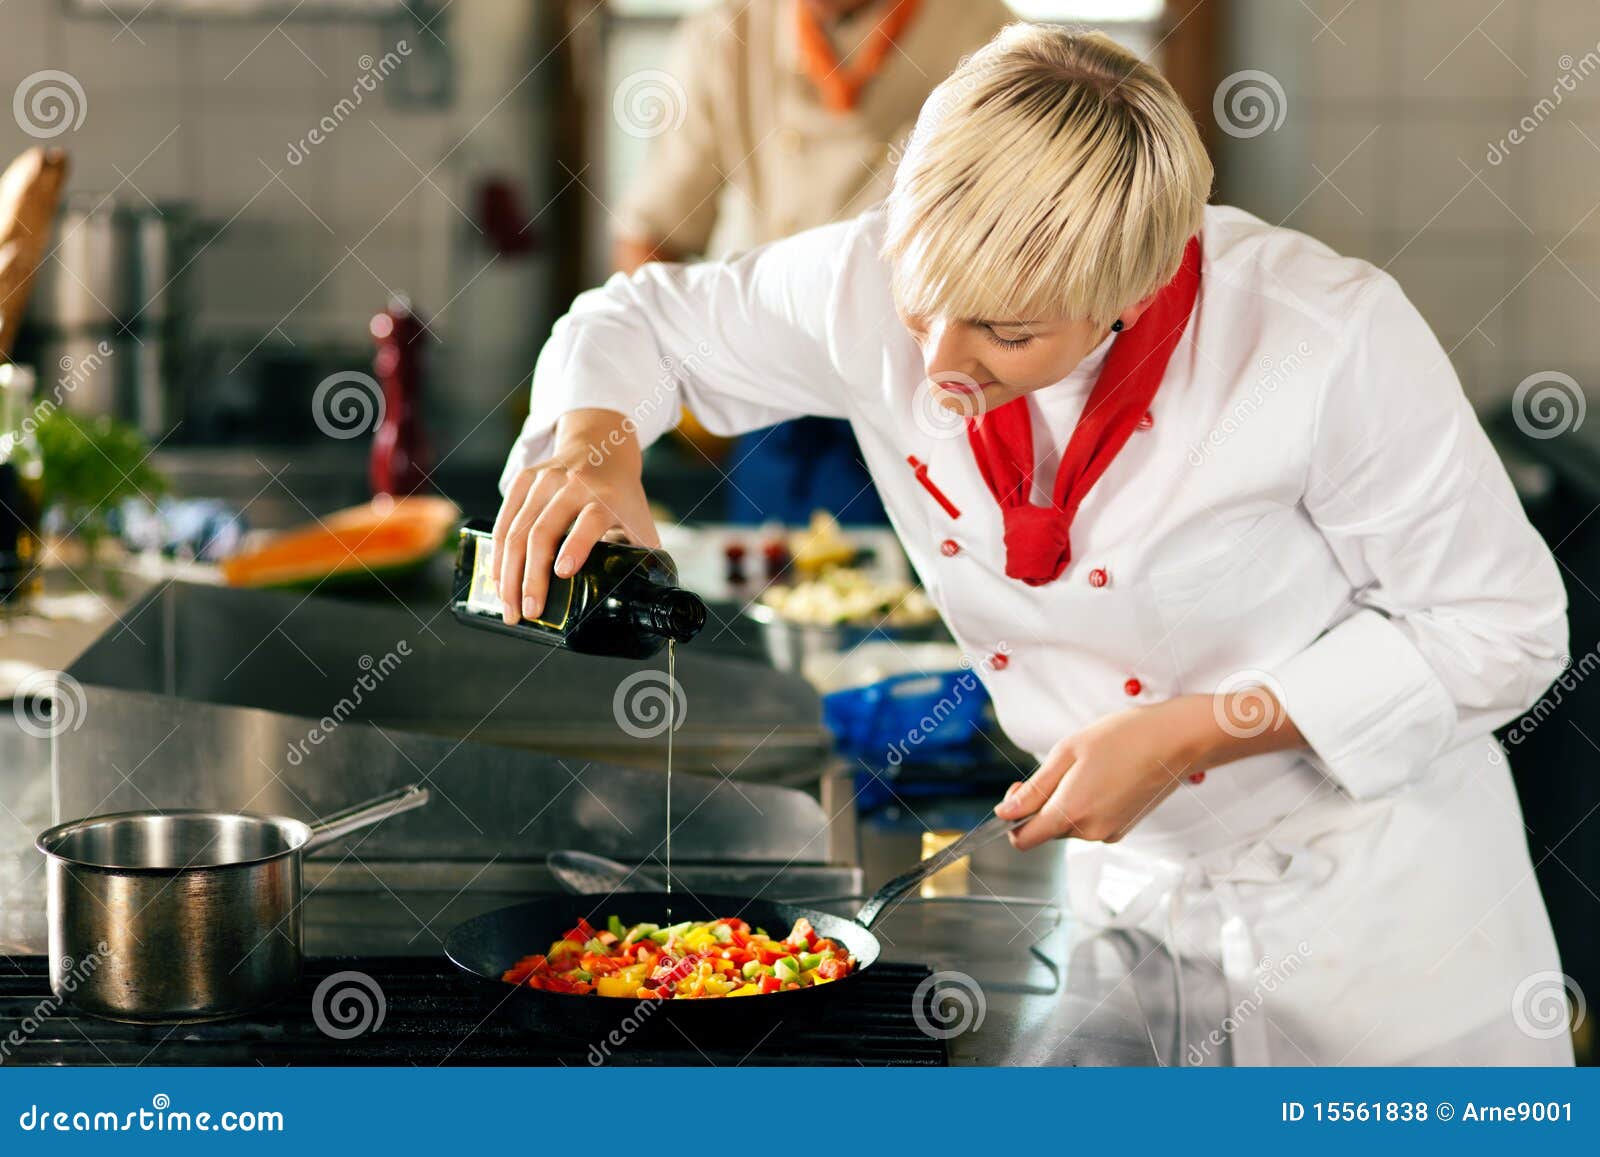 chefs in a restaurant or hotel kitchen cooking